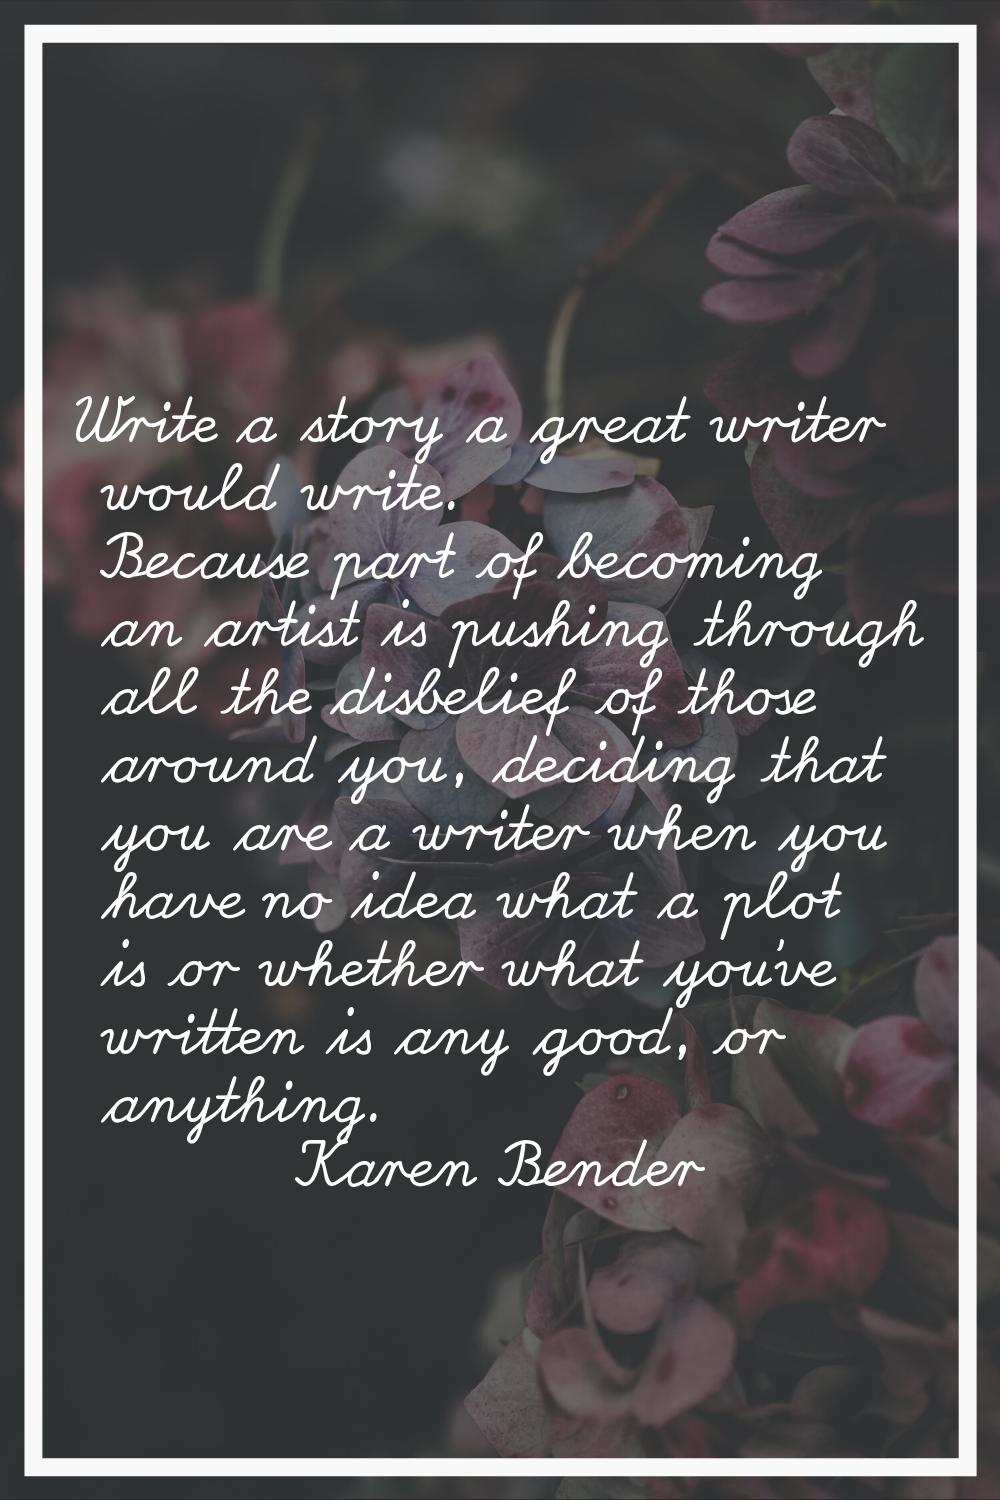 Write a story a great writer would write. Because part of becoming an artist is pushing through all